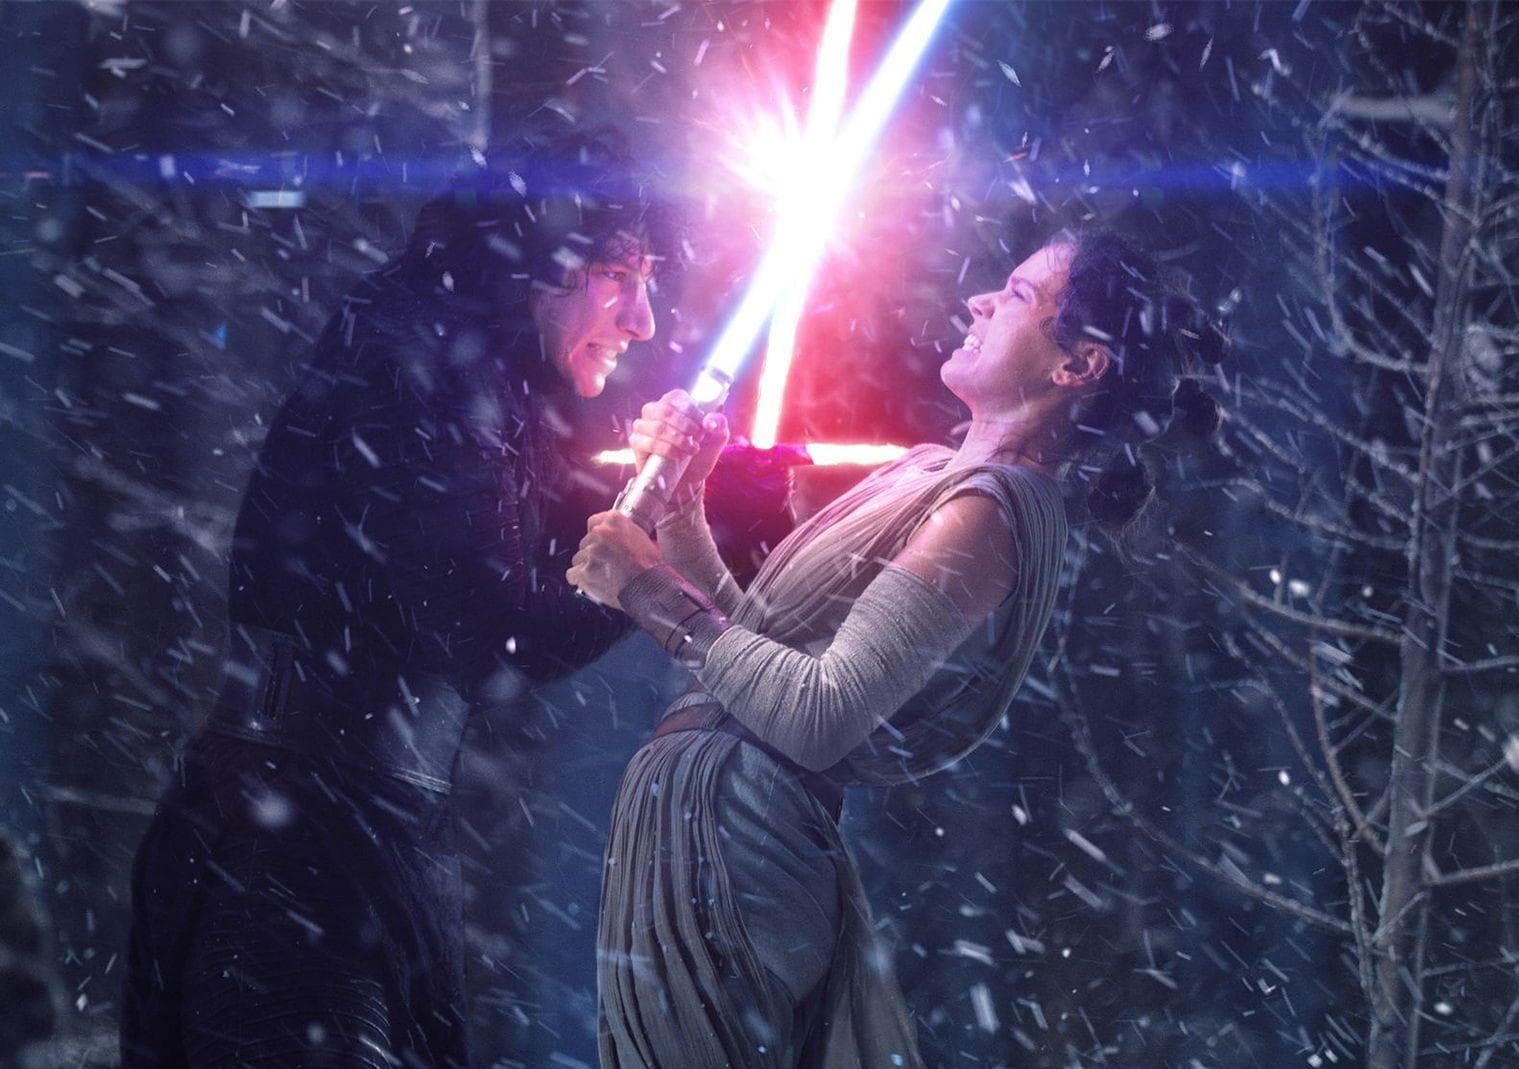 Random Fan Theories About Rey And Kylo Ren That Will Mess With Your Head And Your Heart